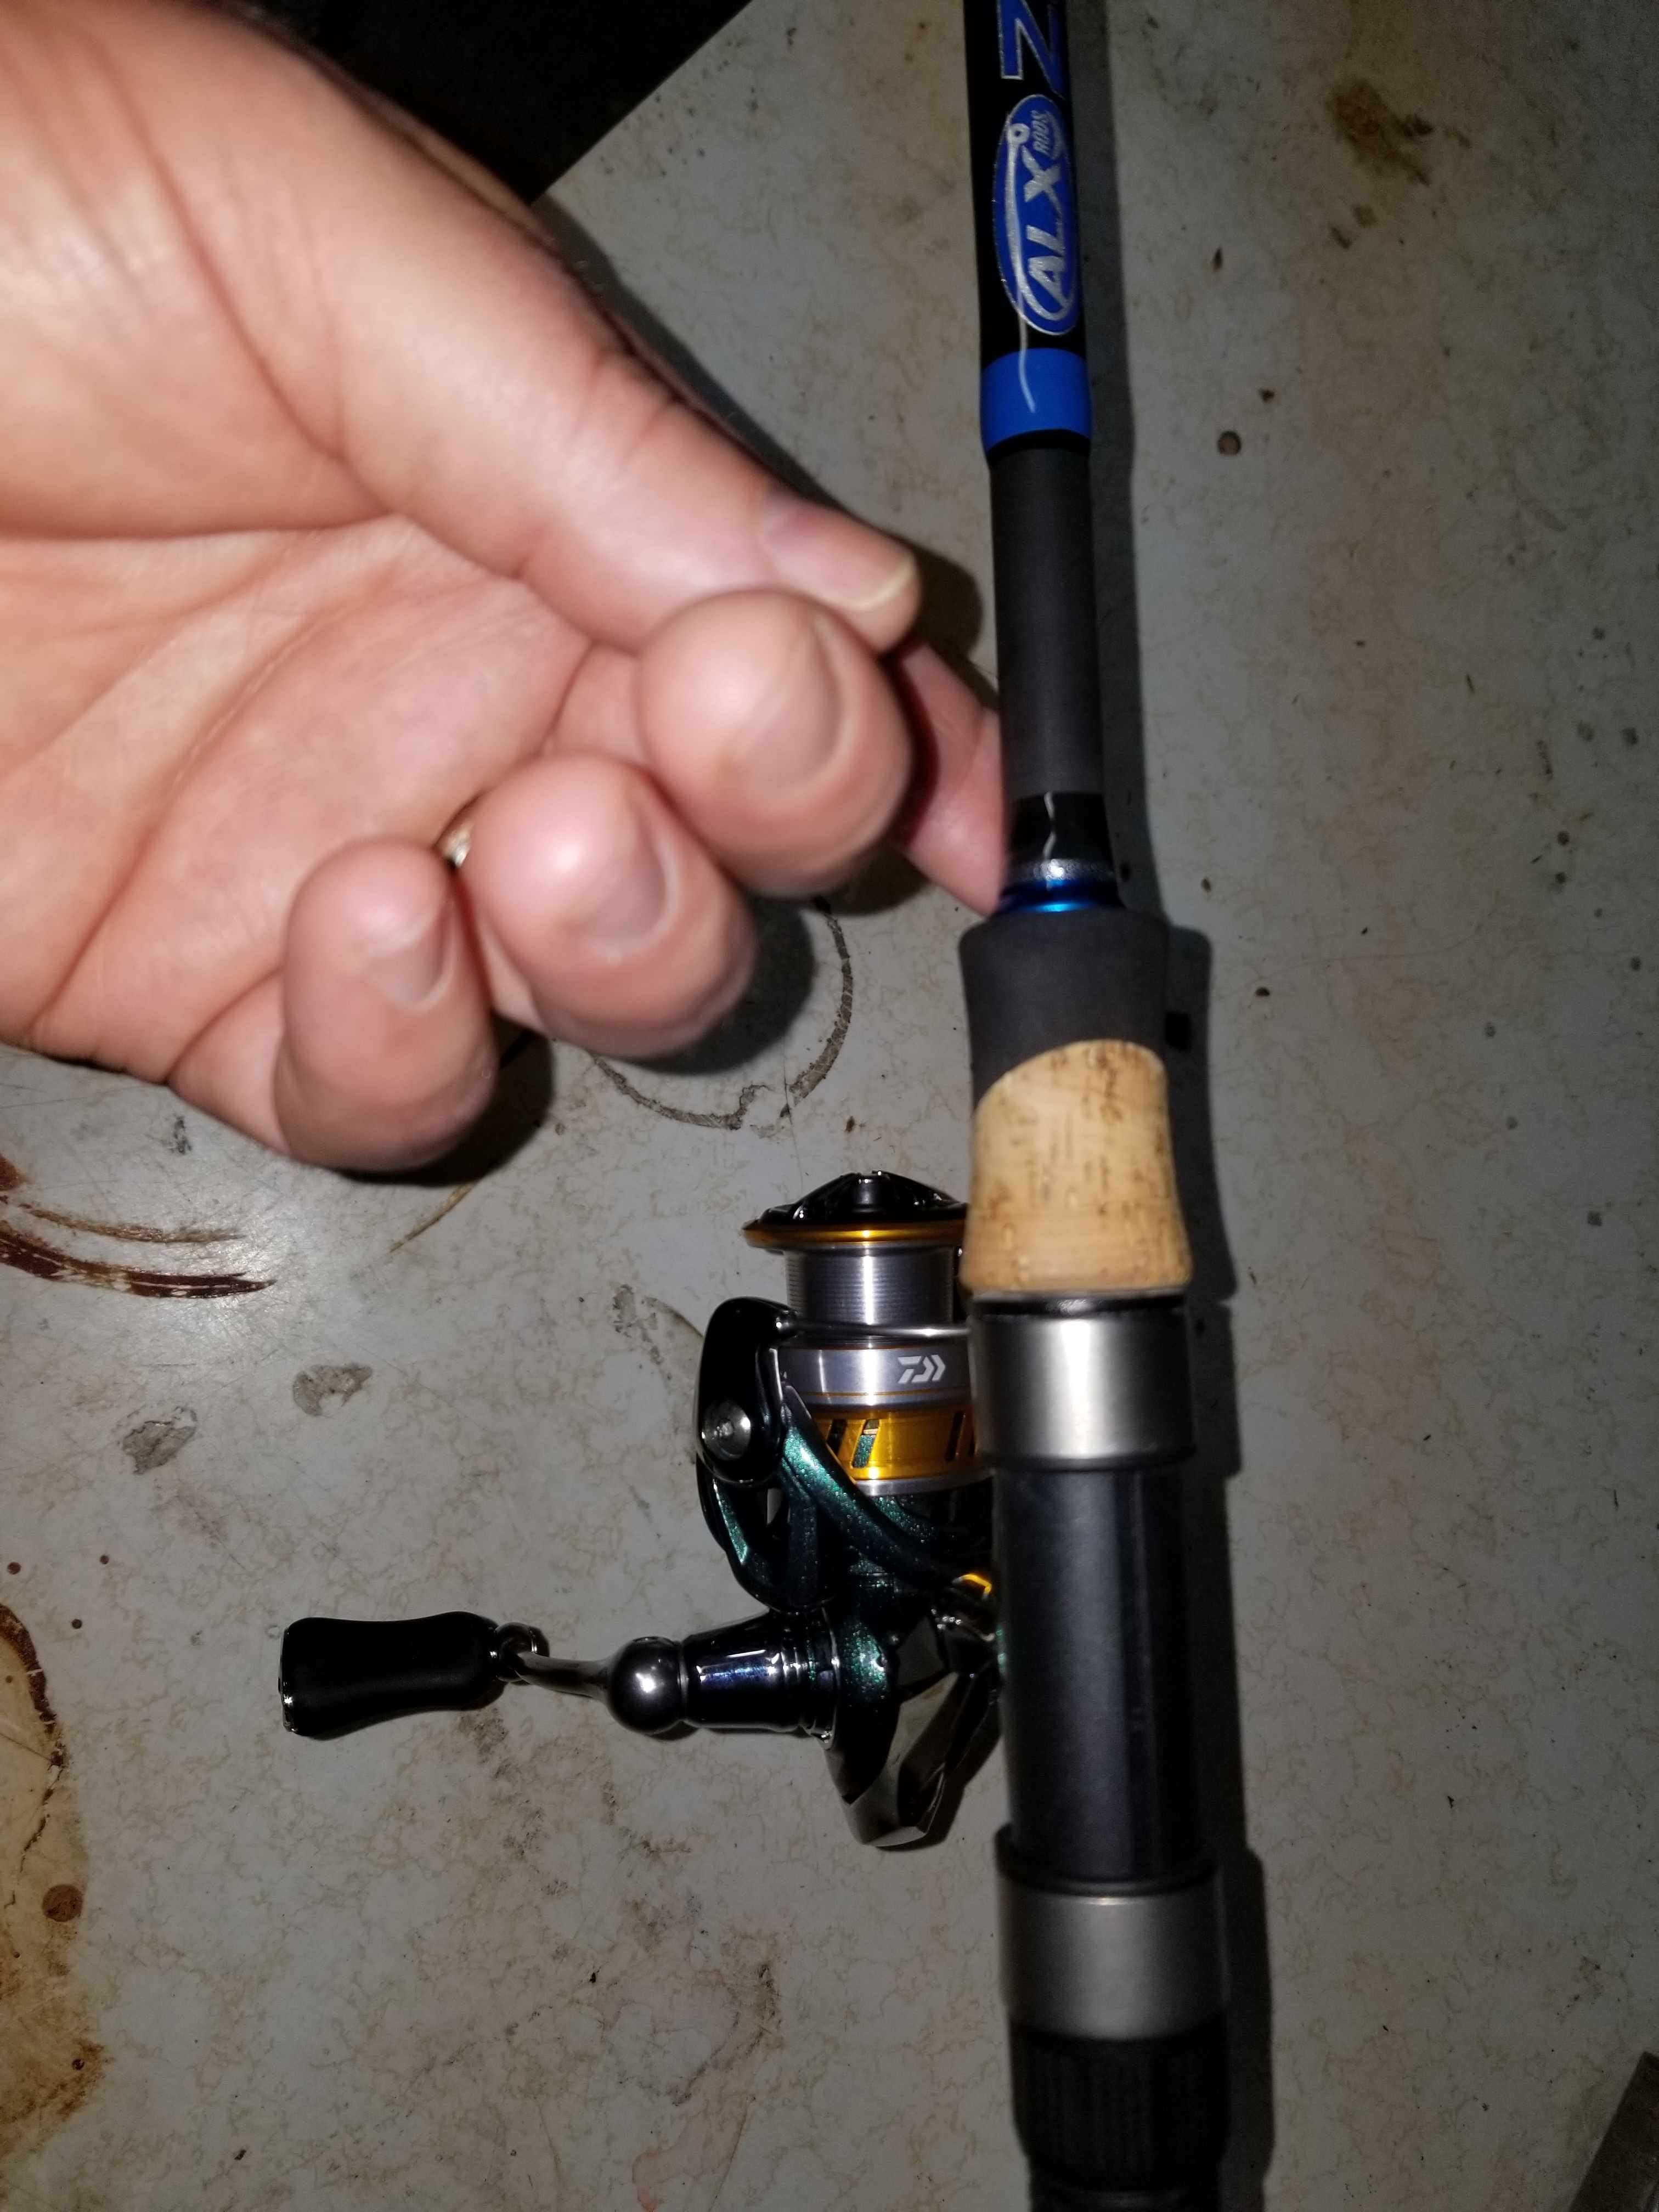 looking for suggestions for light 1000-2000 spinning reel - Fishing Rods,  Reels, Line, and Knots - Bass Fishing Forums